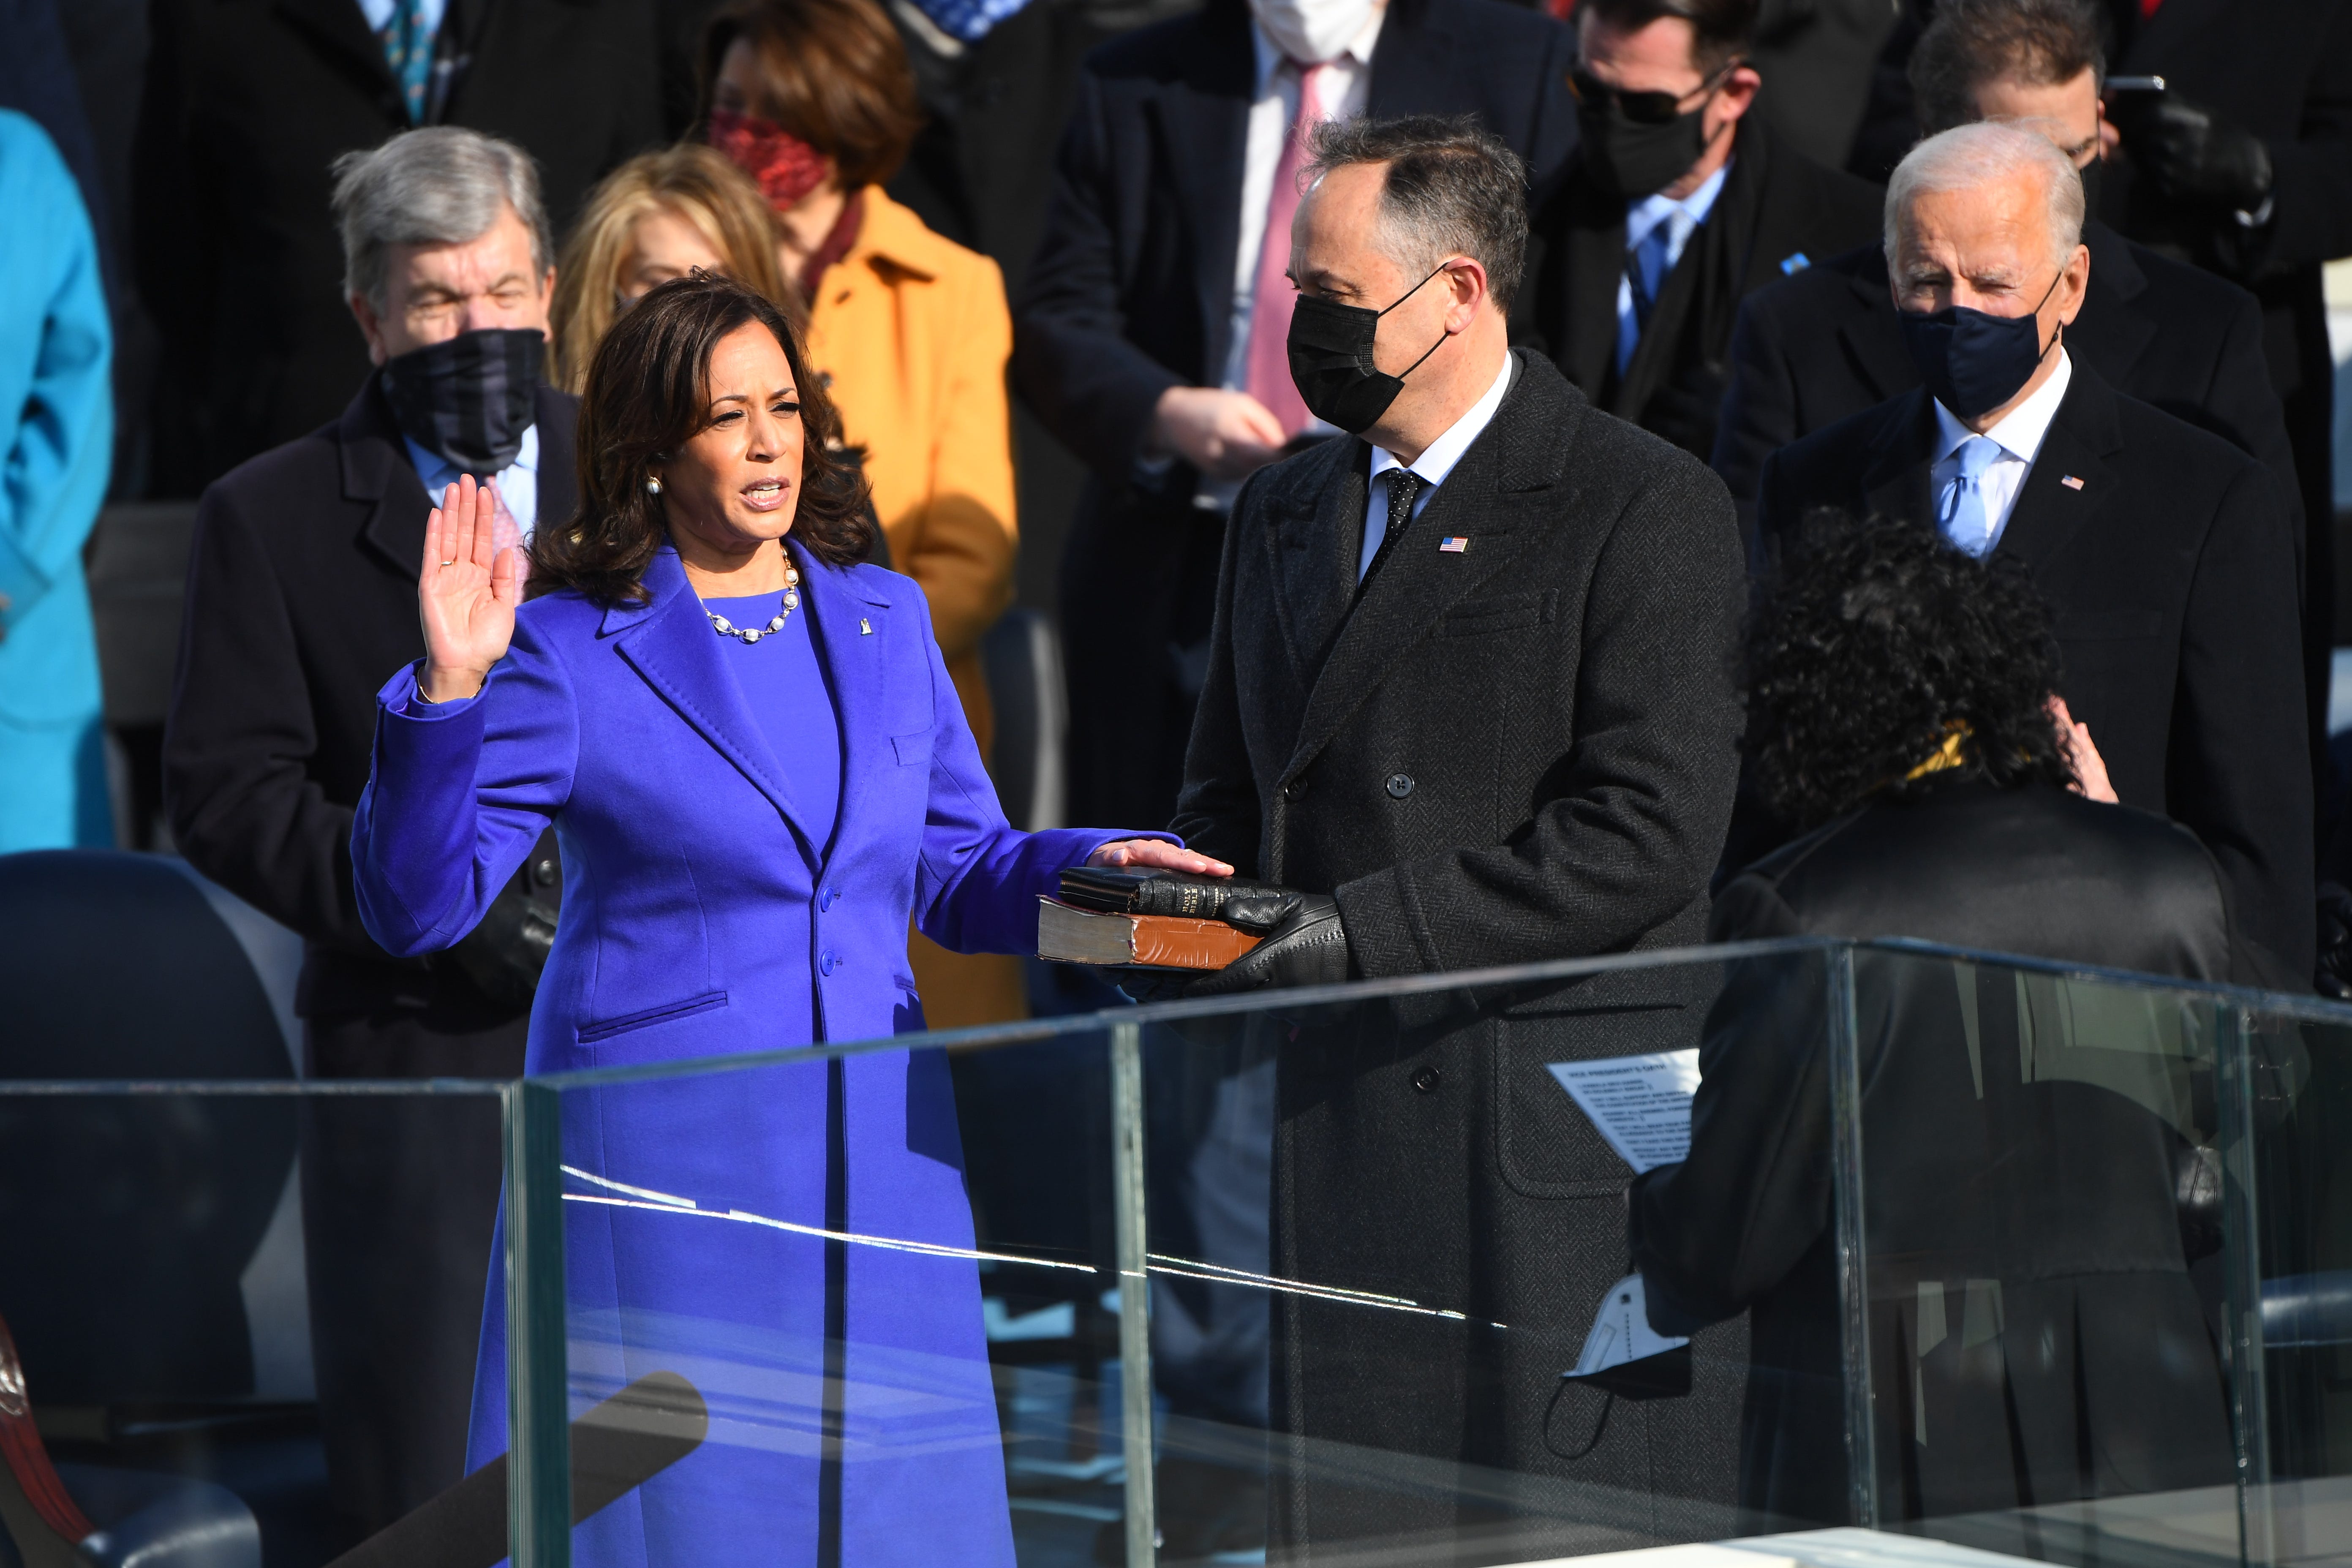 Vice President Kamala Harris is sworn in during the 2021 Presidential Inauguration.